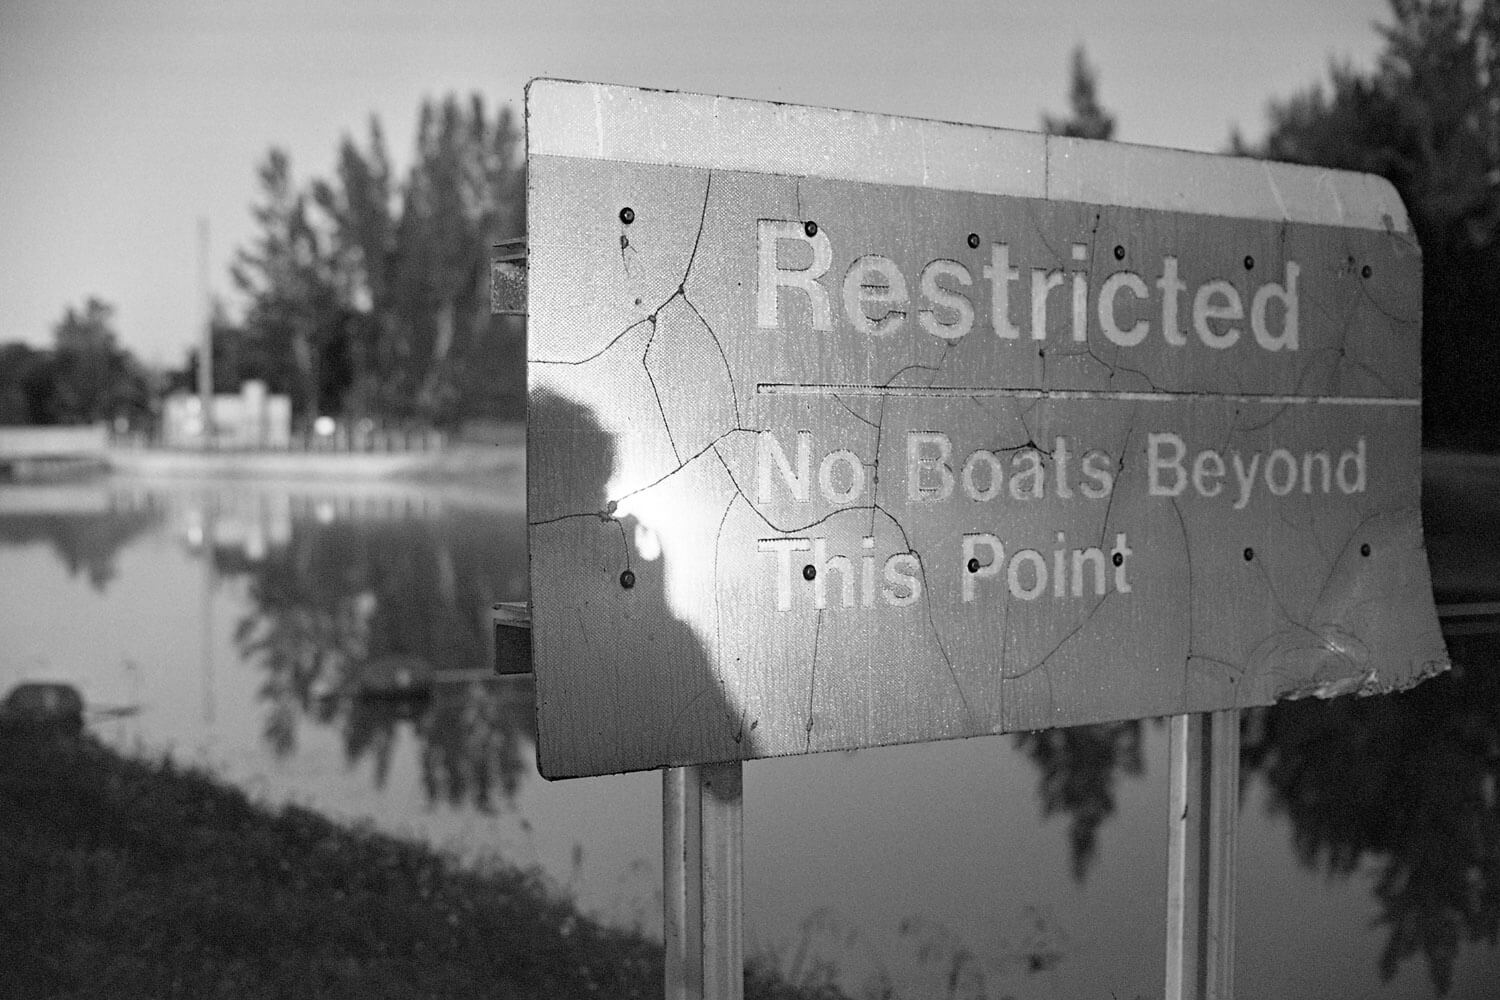 5 Frames... Of canals, locks, floodgates, sluices, and levees on ILFORD XP2 Super (35mm / EI 320 + Y48 Filter / Nikon F3 + MD-4 / 50mm 1.2 AI-s) - by Patrick Gillin